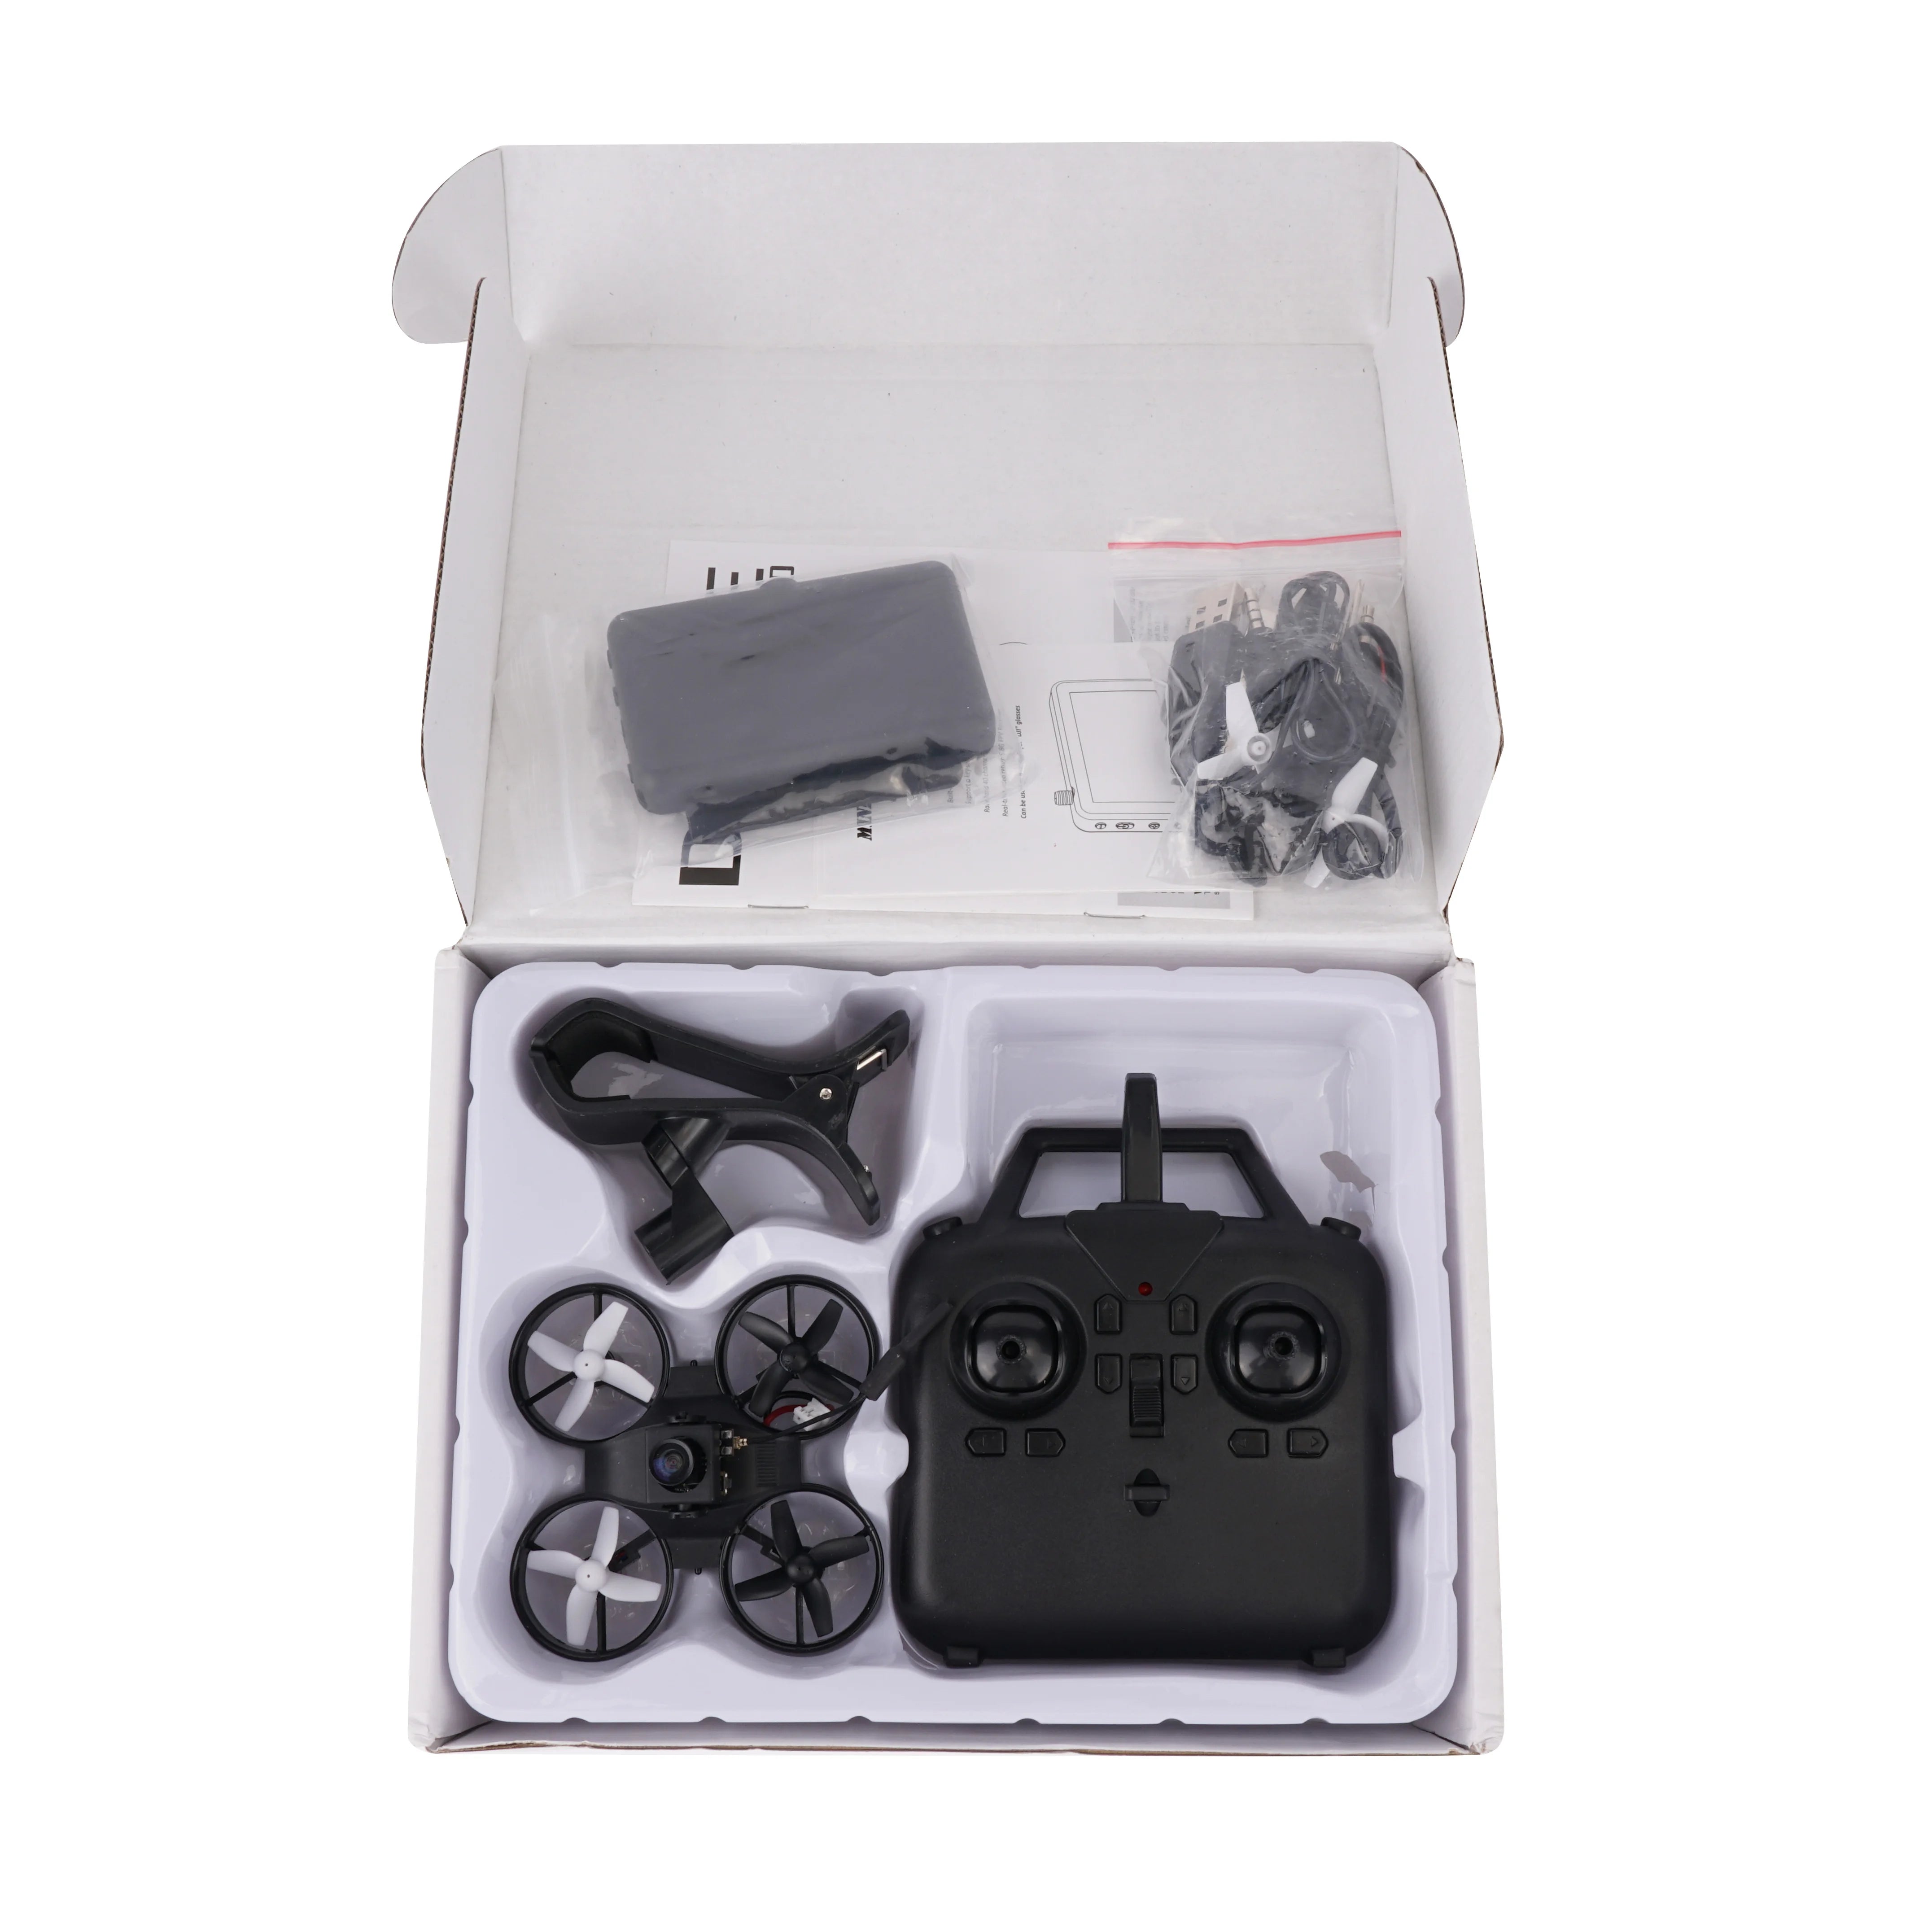 RTF Micro FPV RC Racing Drone, 3.FPV Goggles: comes with a resolution of 480*320 brightness LCD